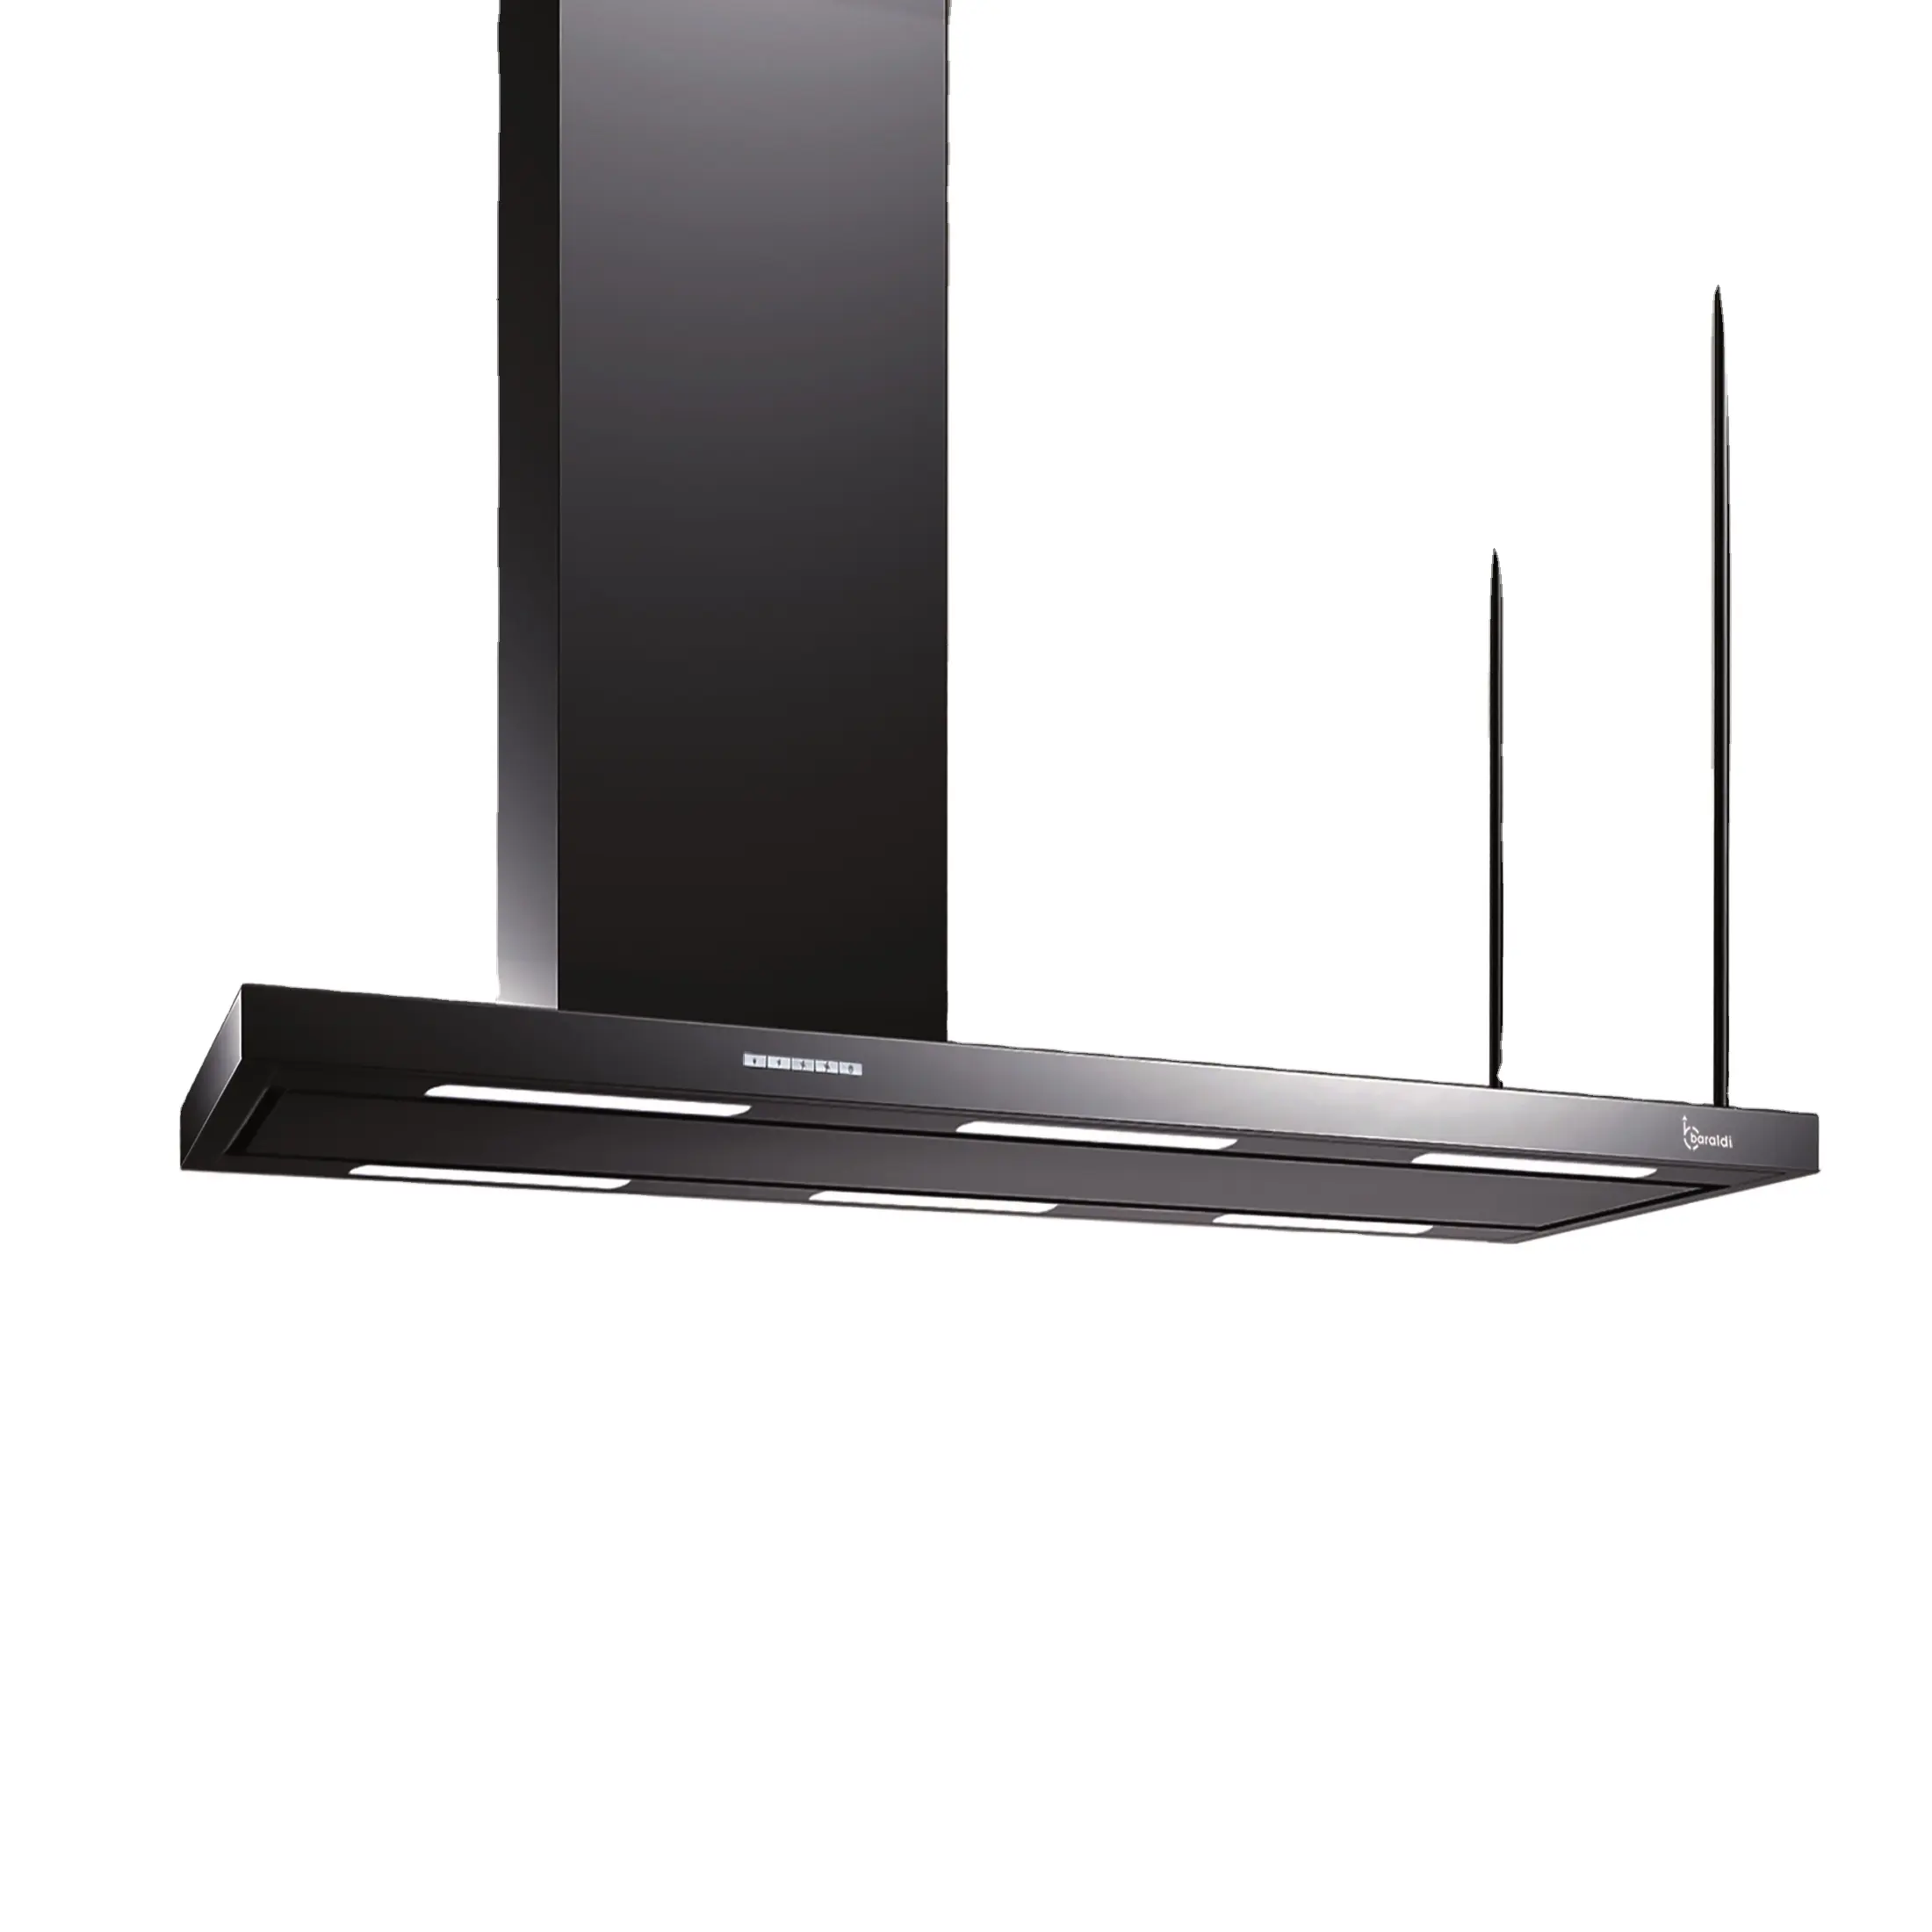 High Quality Made in Italy Design Black Island Hood Range Hood 146x60 cm ELEA ISOLA for Kitchen and Cooking